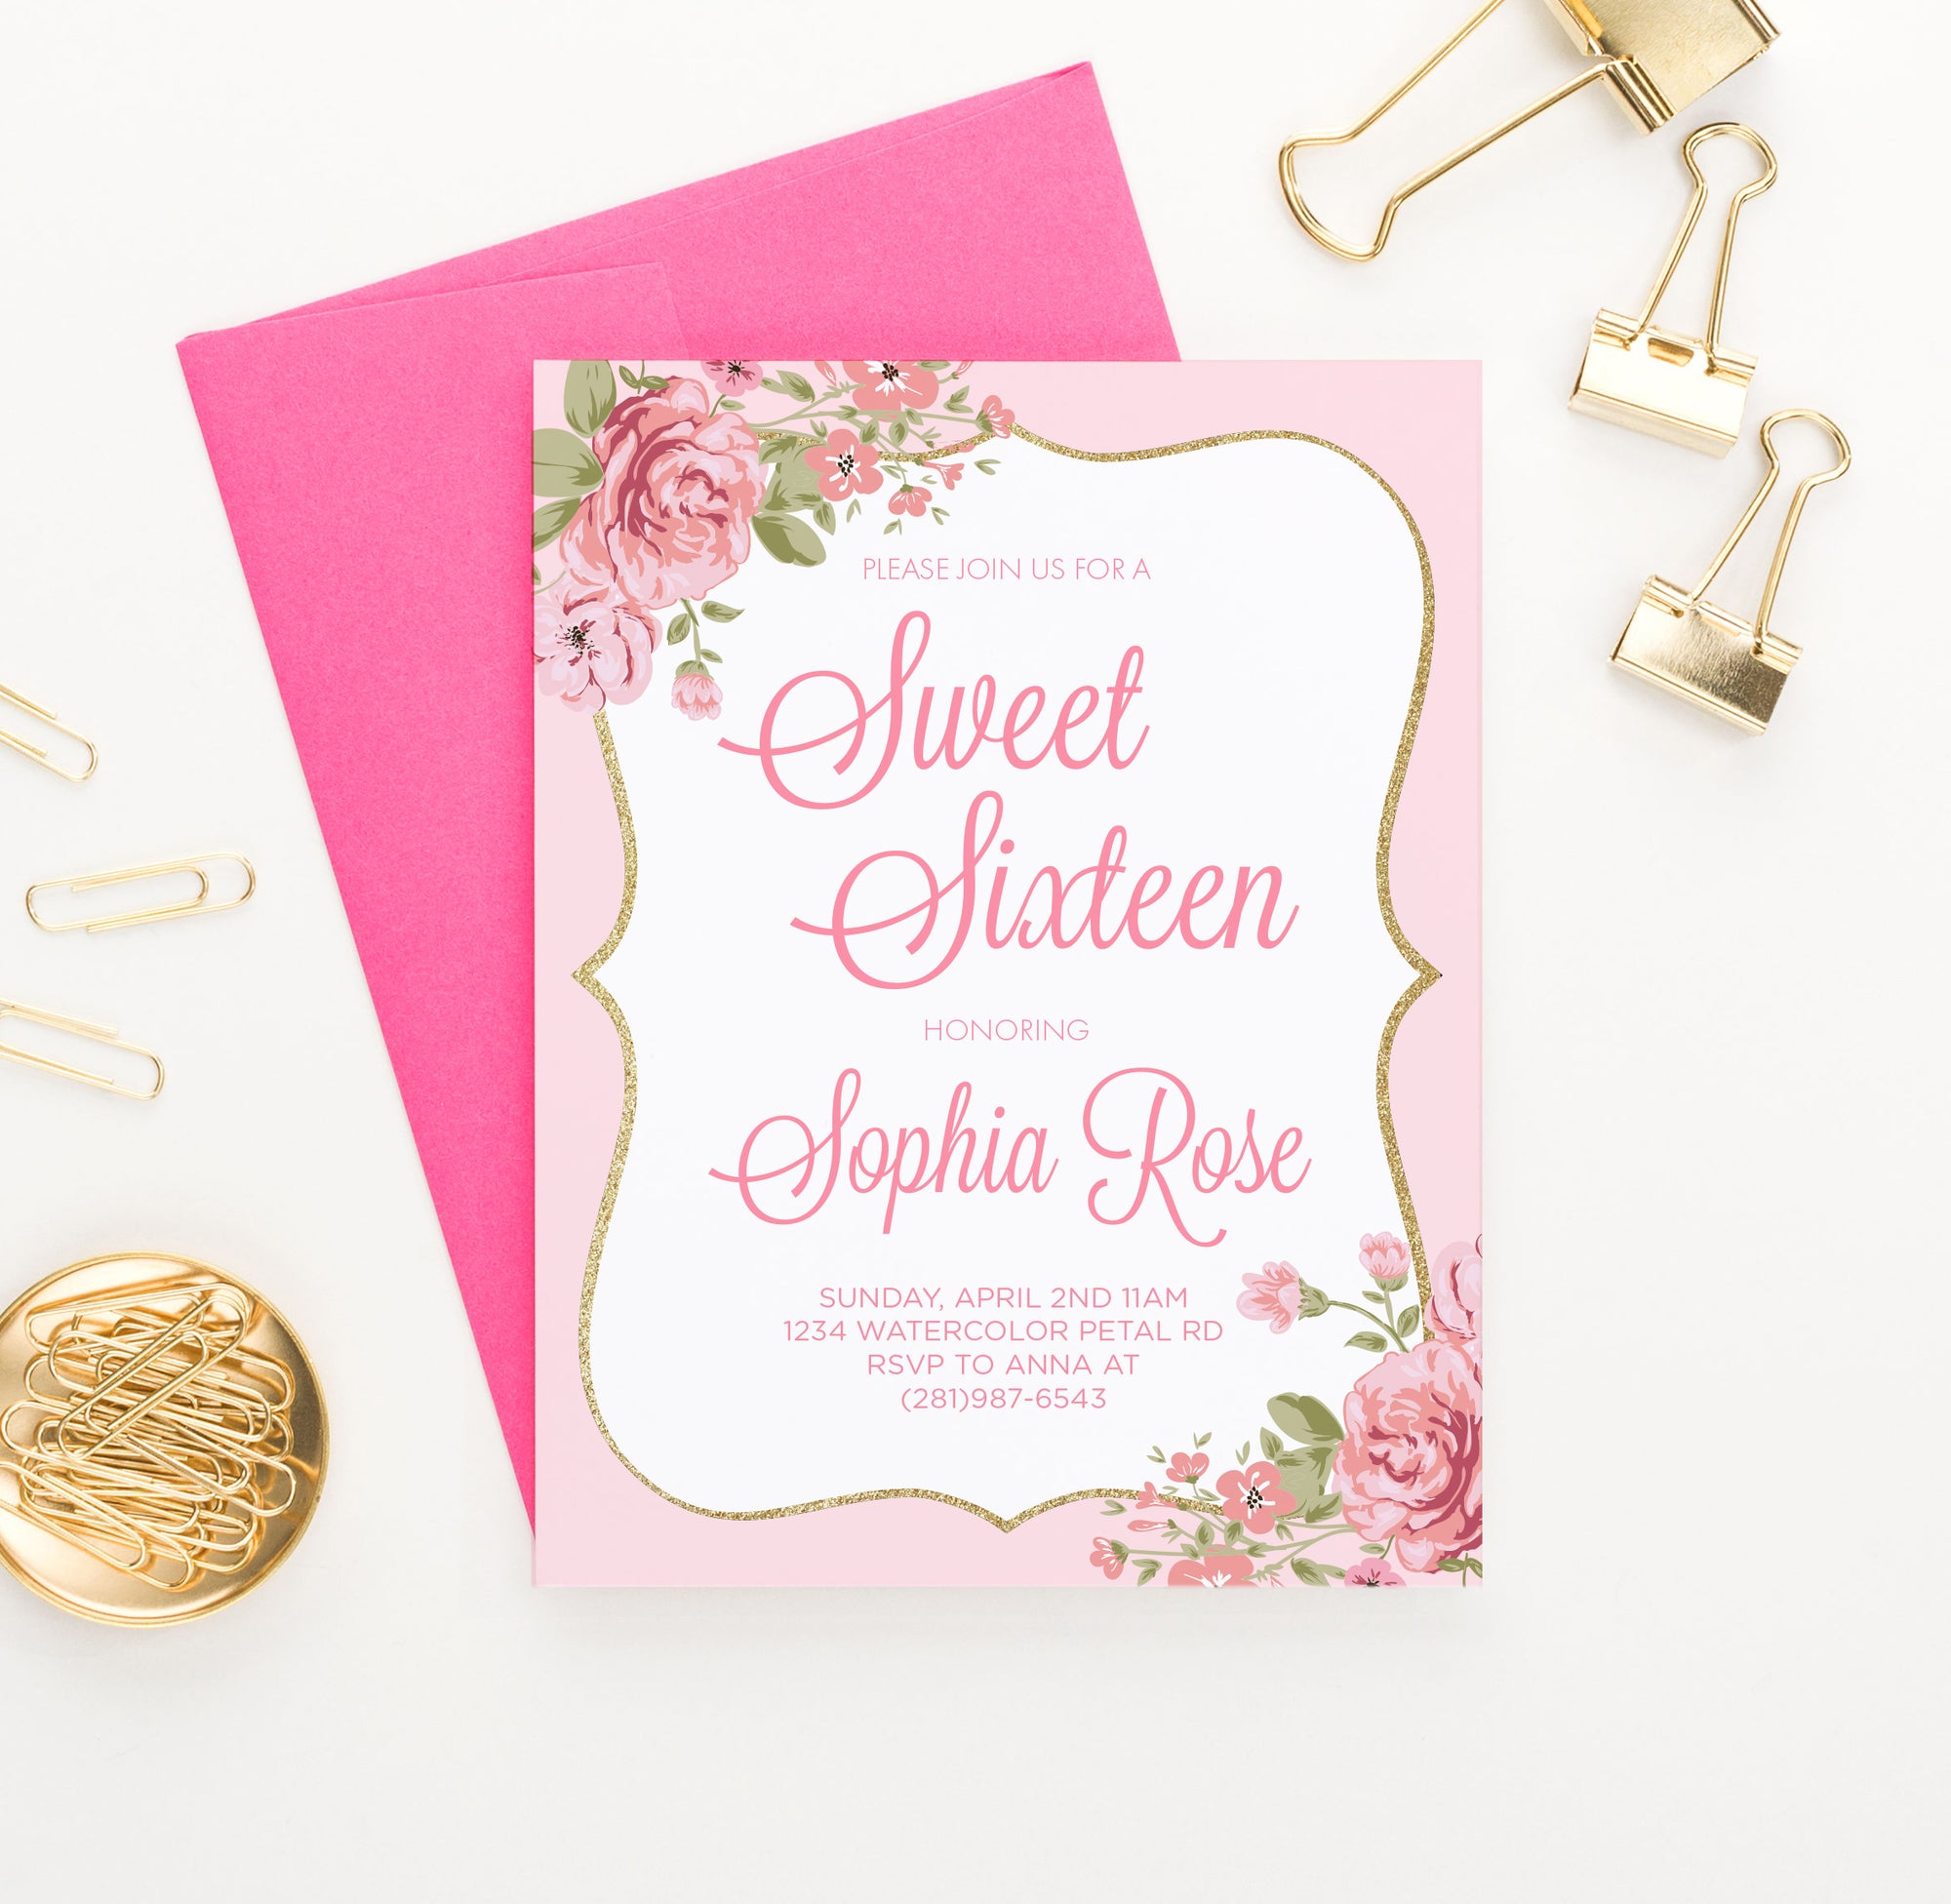 Personalized Pink Elegant Sweet Sixteen Invitations With Florals 